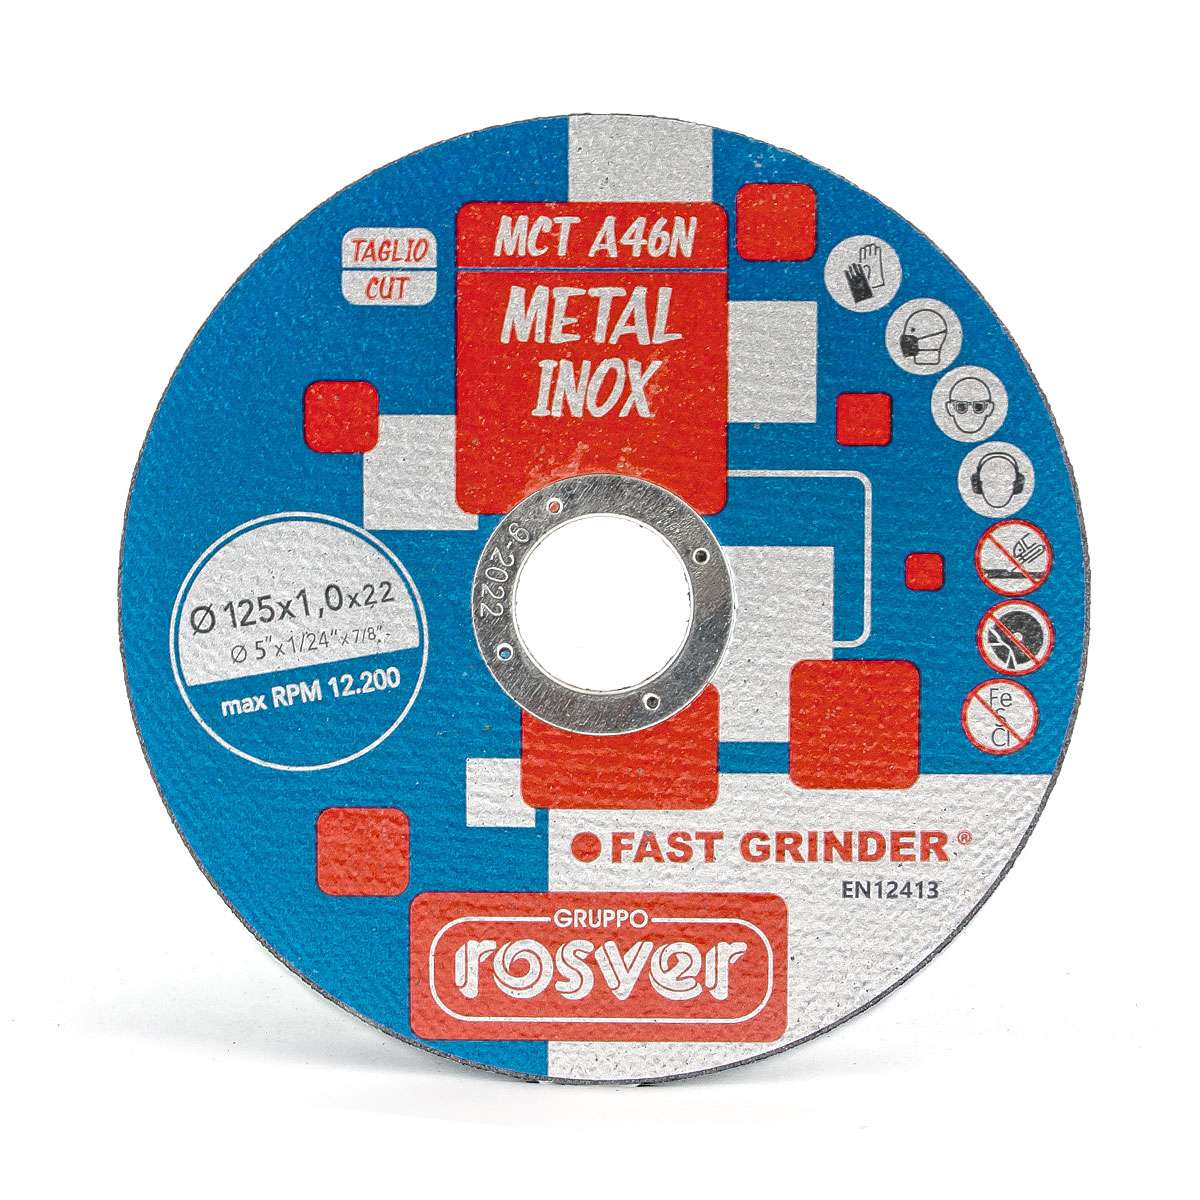 Thin Flat Cutting Discs 125x1x22 A46N for stainless steel Rosver